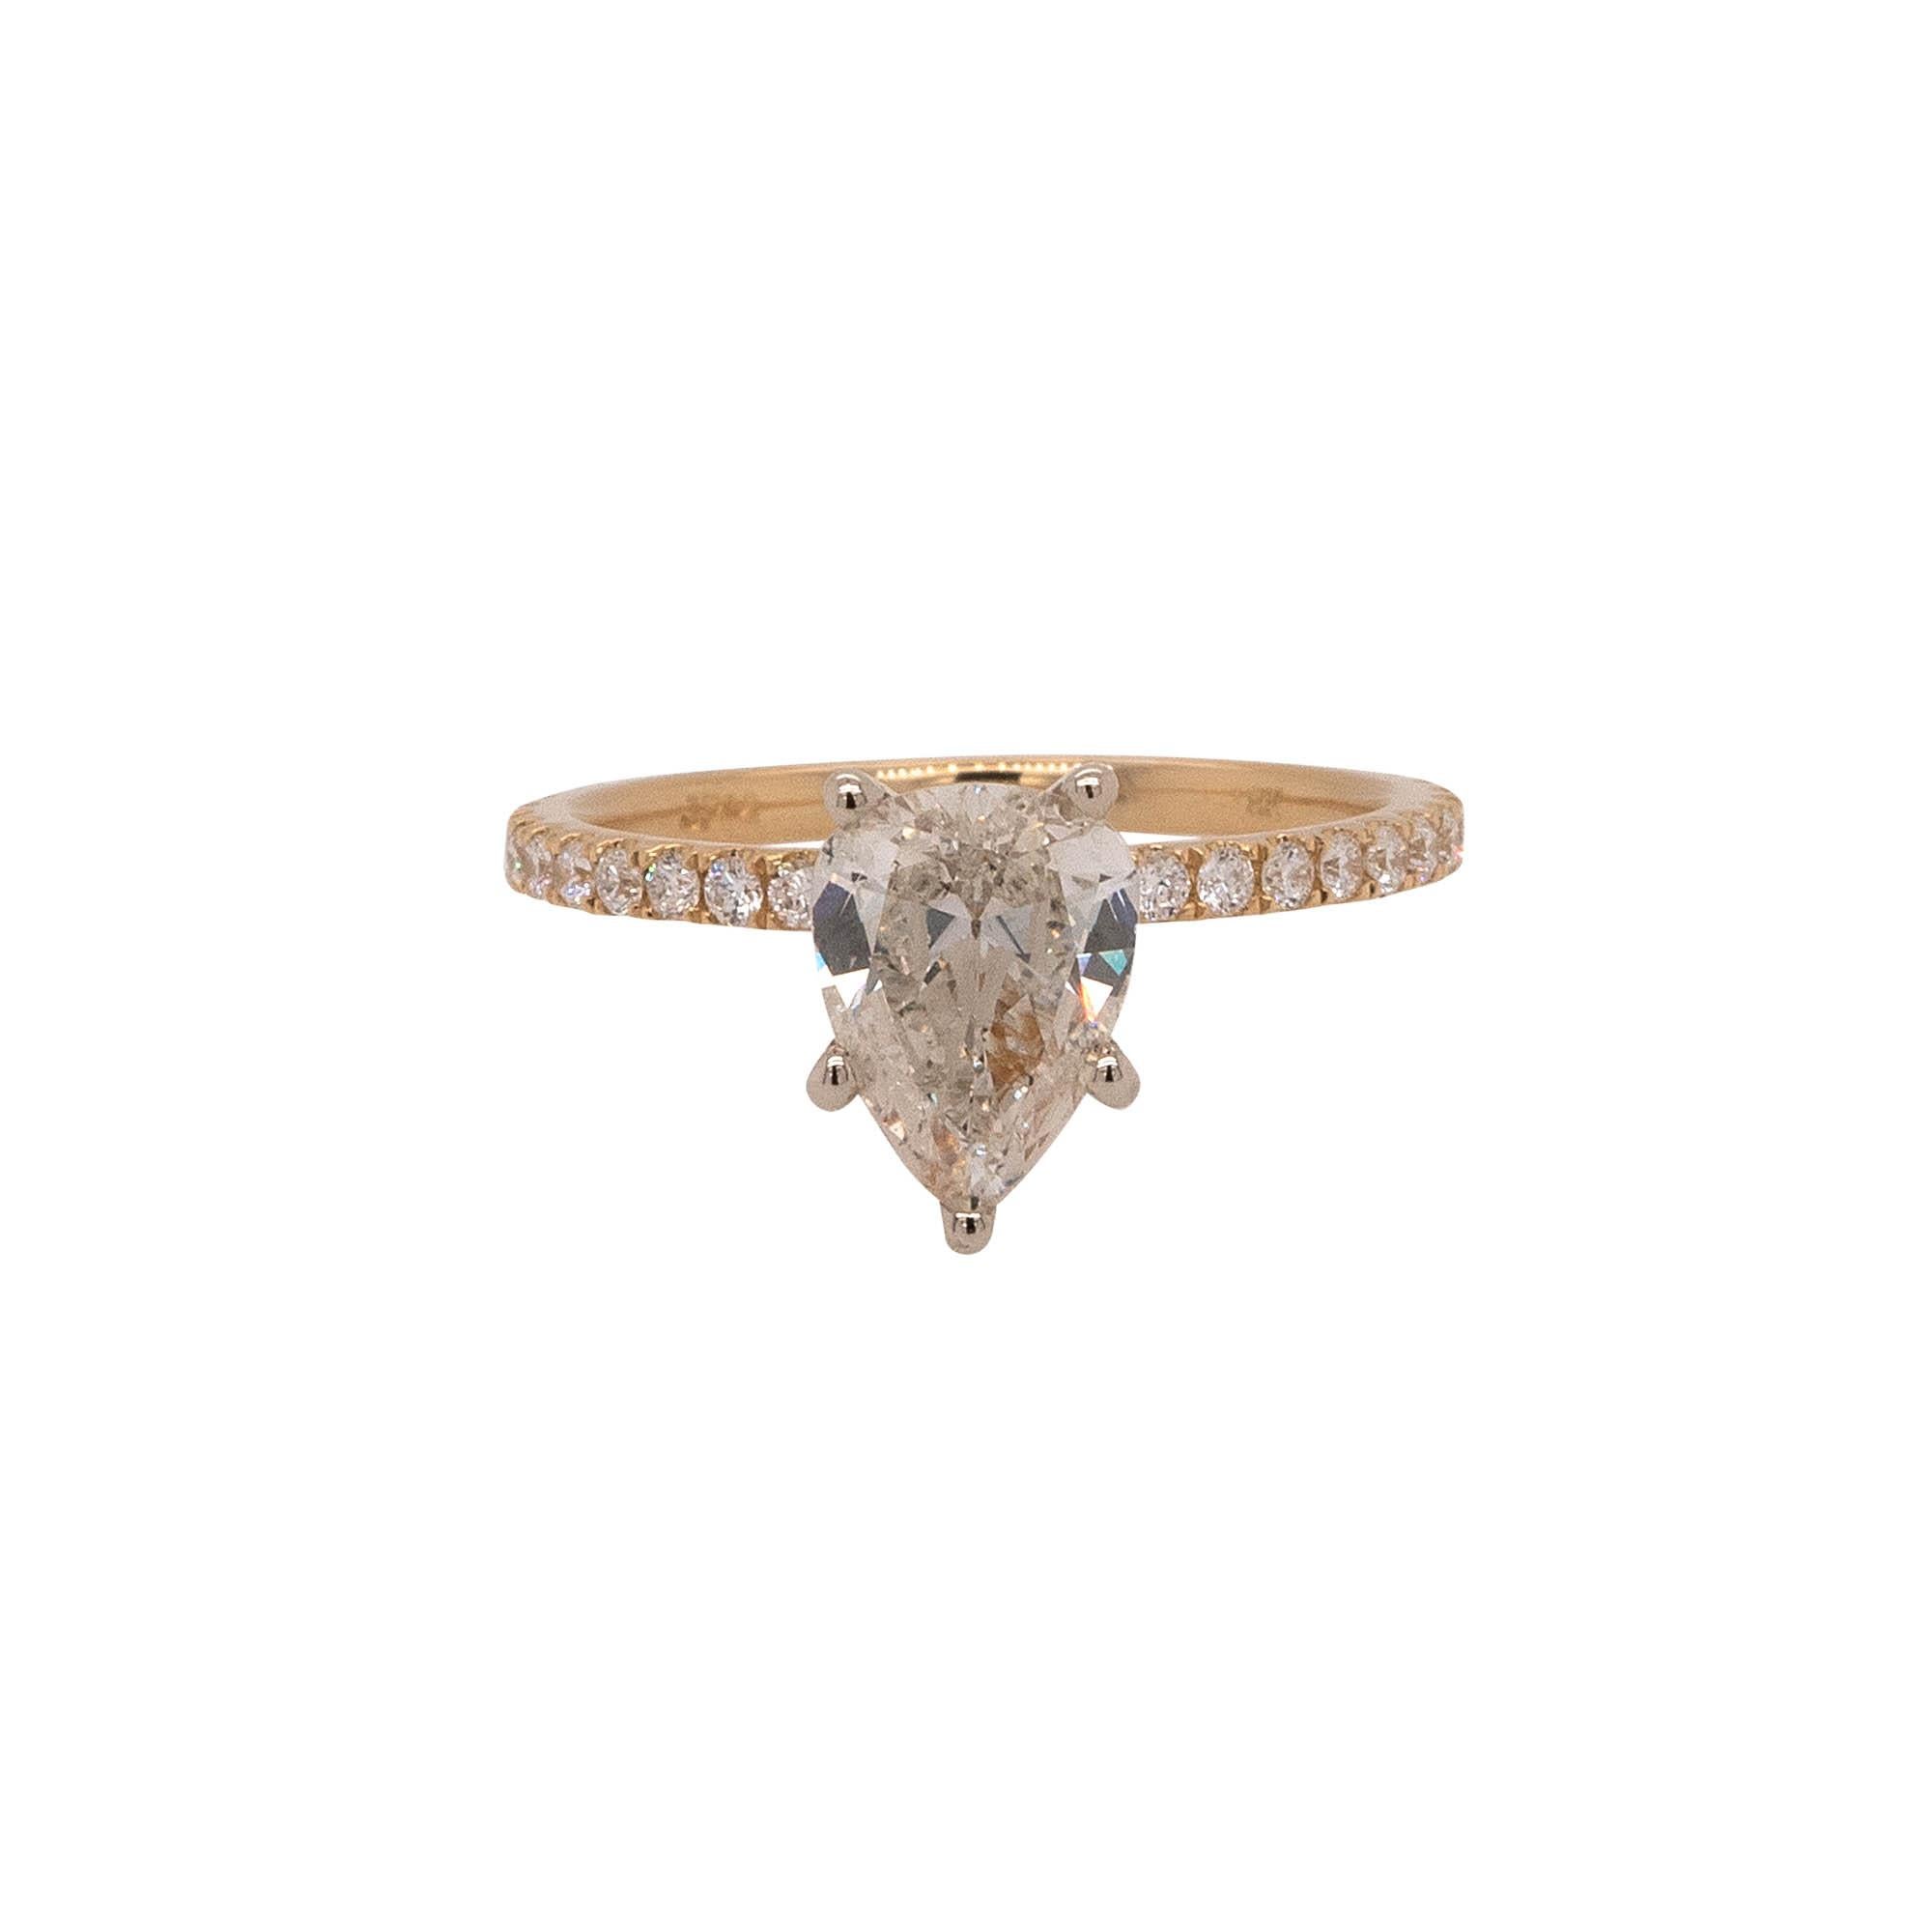 Center Details: 1.39ct Pear shape natural Diamond that is J in color and SI2 in clarity
Ring Material: 18k yellow gold
Ring Details: yellow gold ring that is paved with approximately 0.38ctw of round cut natural diamonds that are G/H in color and VS